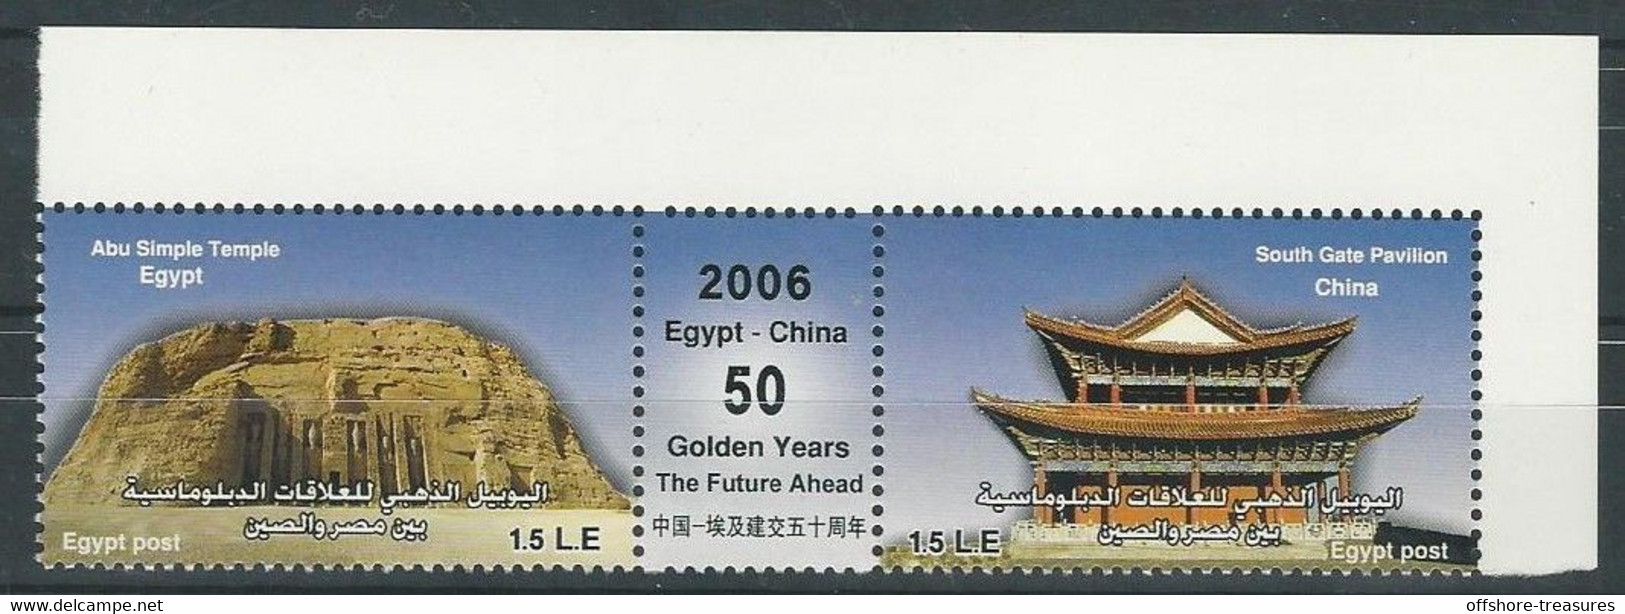 Egypt Stamp China 2006 Joint Issue - 50th Anniversary Of Egypt - China Diplomatic Relations - Margin Strip /Stamps - Neufs